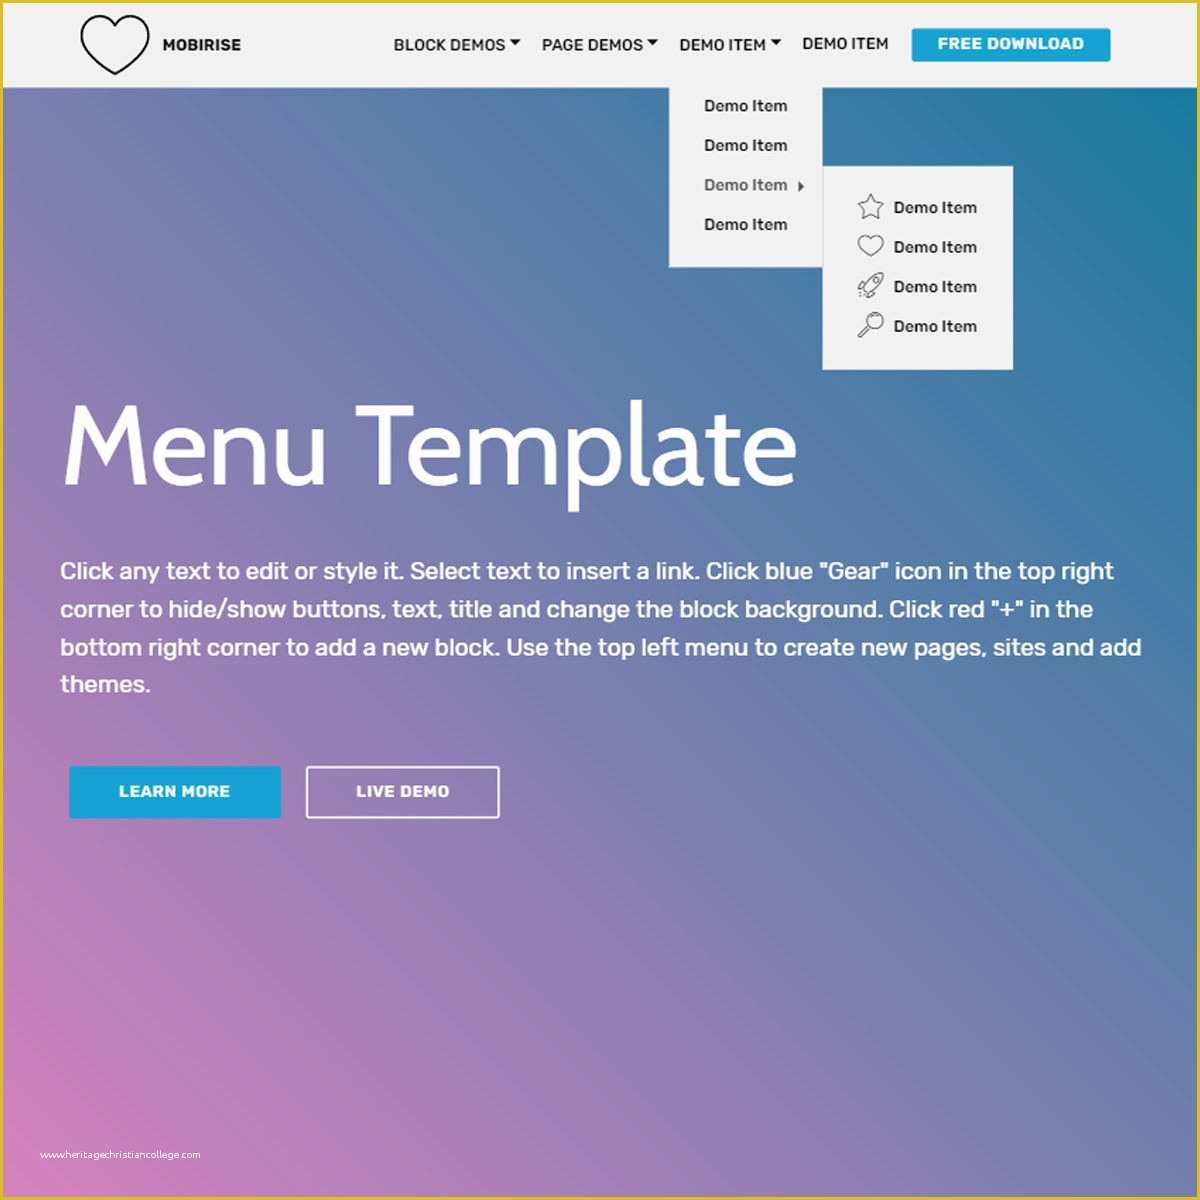 Free Website Template Editor Of How to Edit A Downloaded Website Template 03adc37b0c50